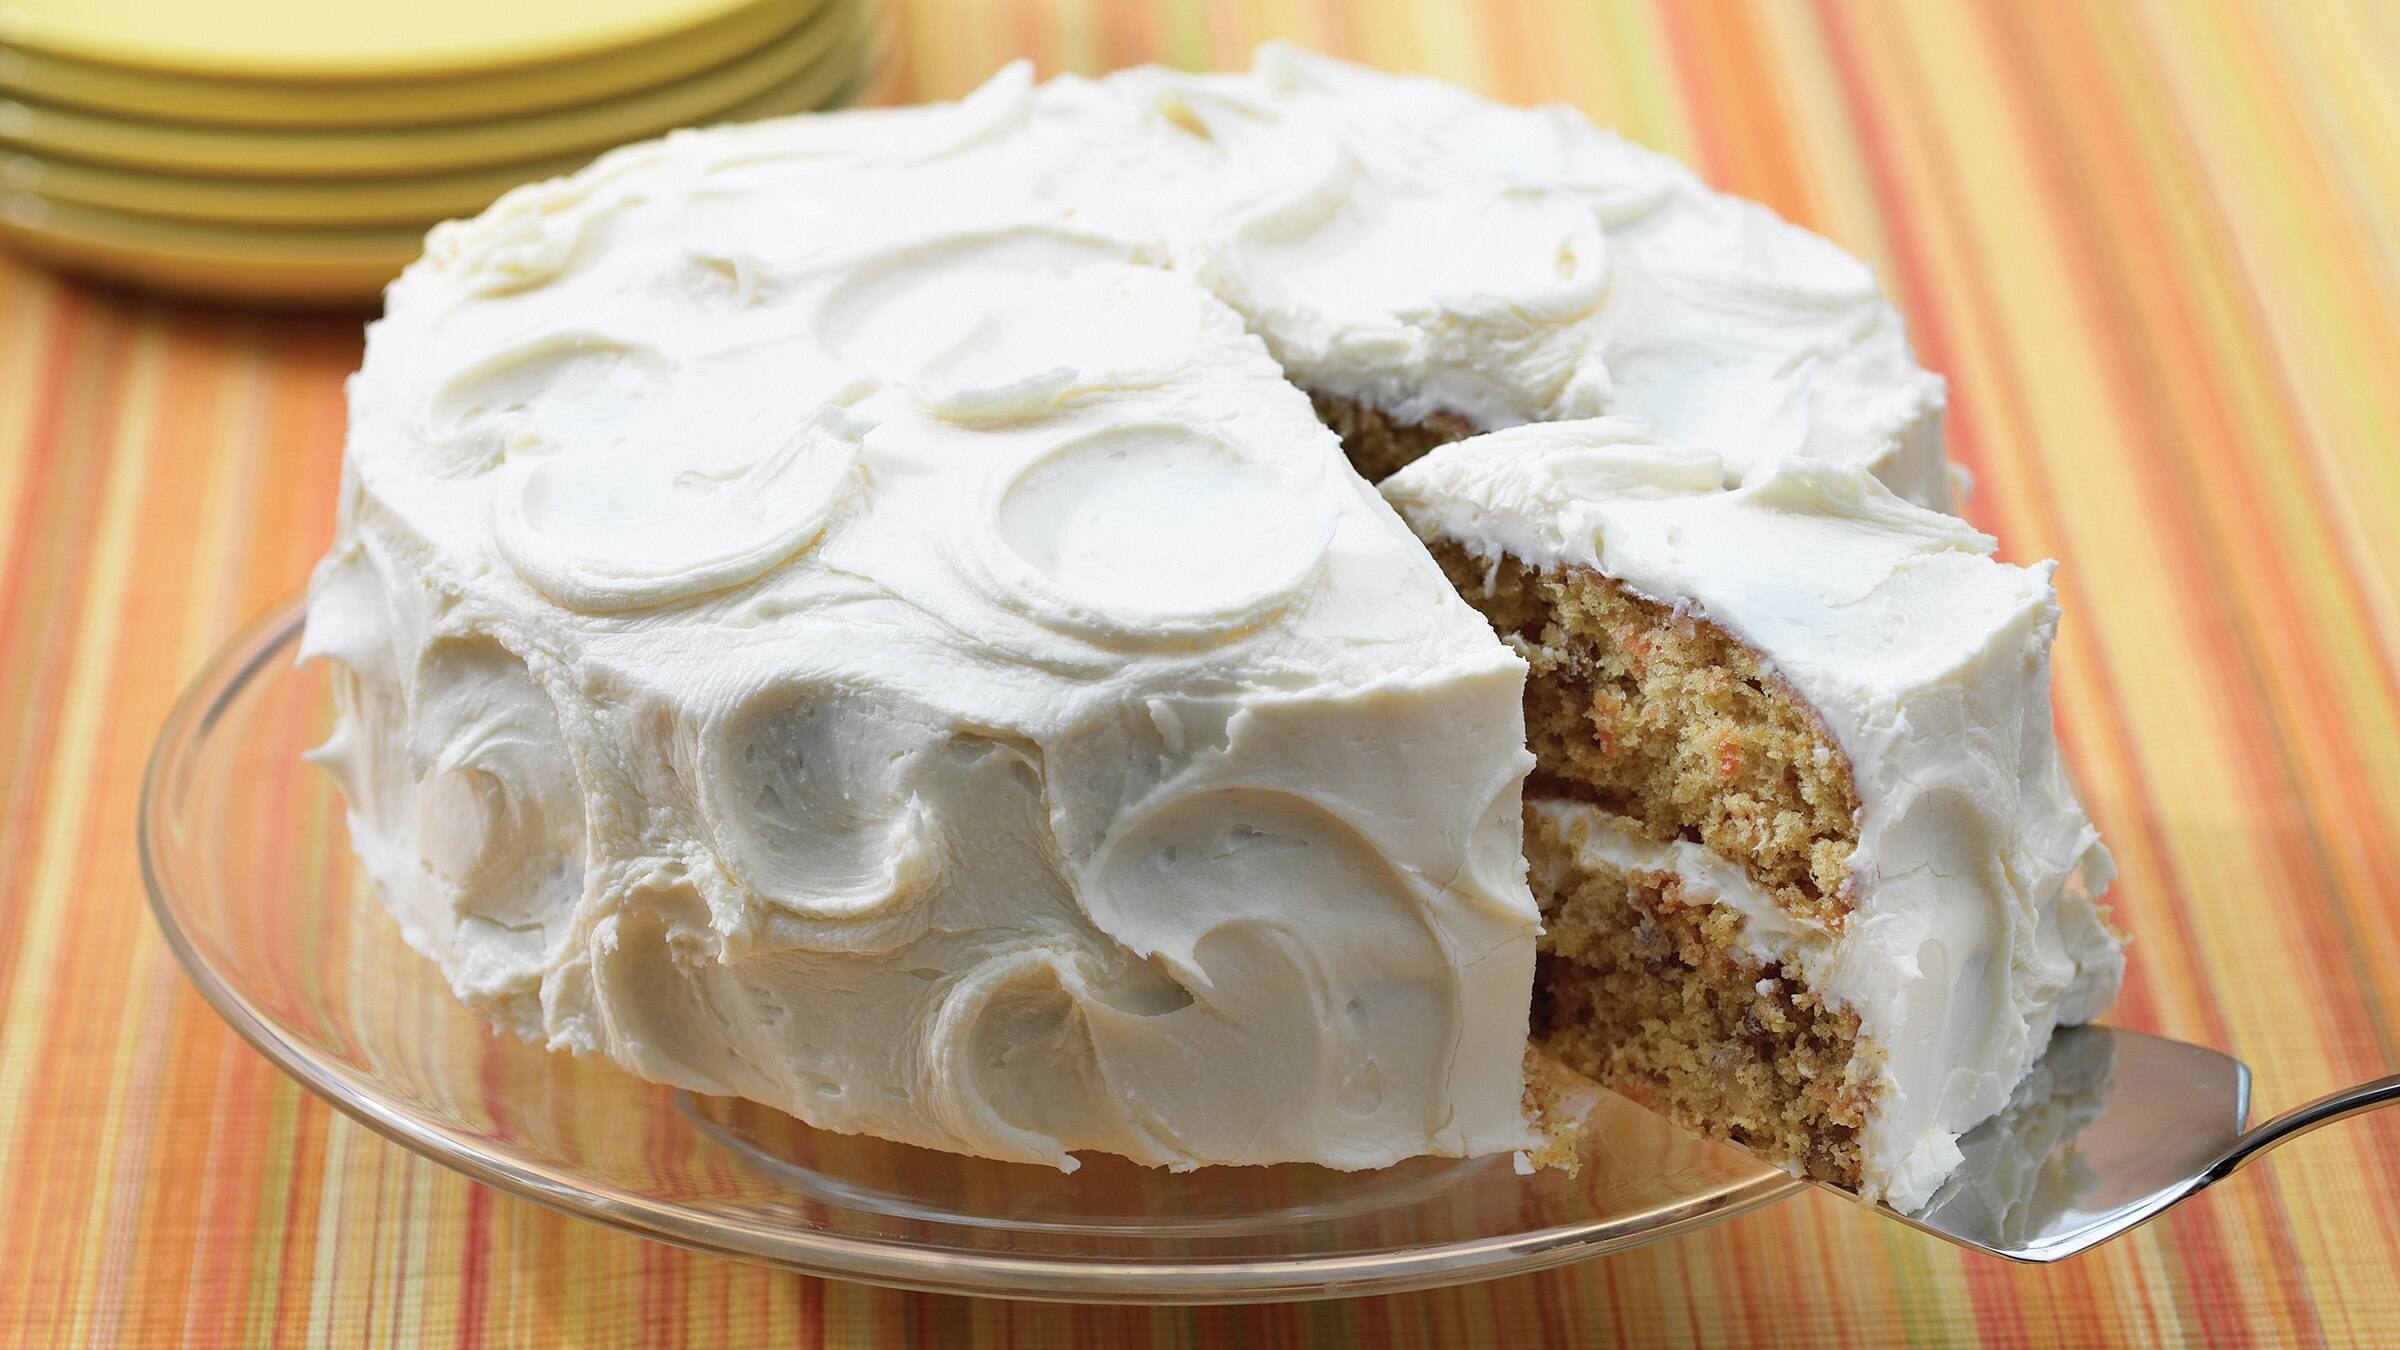 Scrumptious Carrot Cake with Cream Cheese Frosting